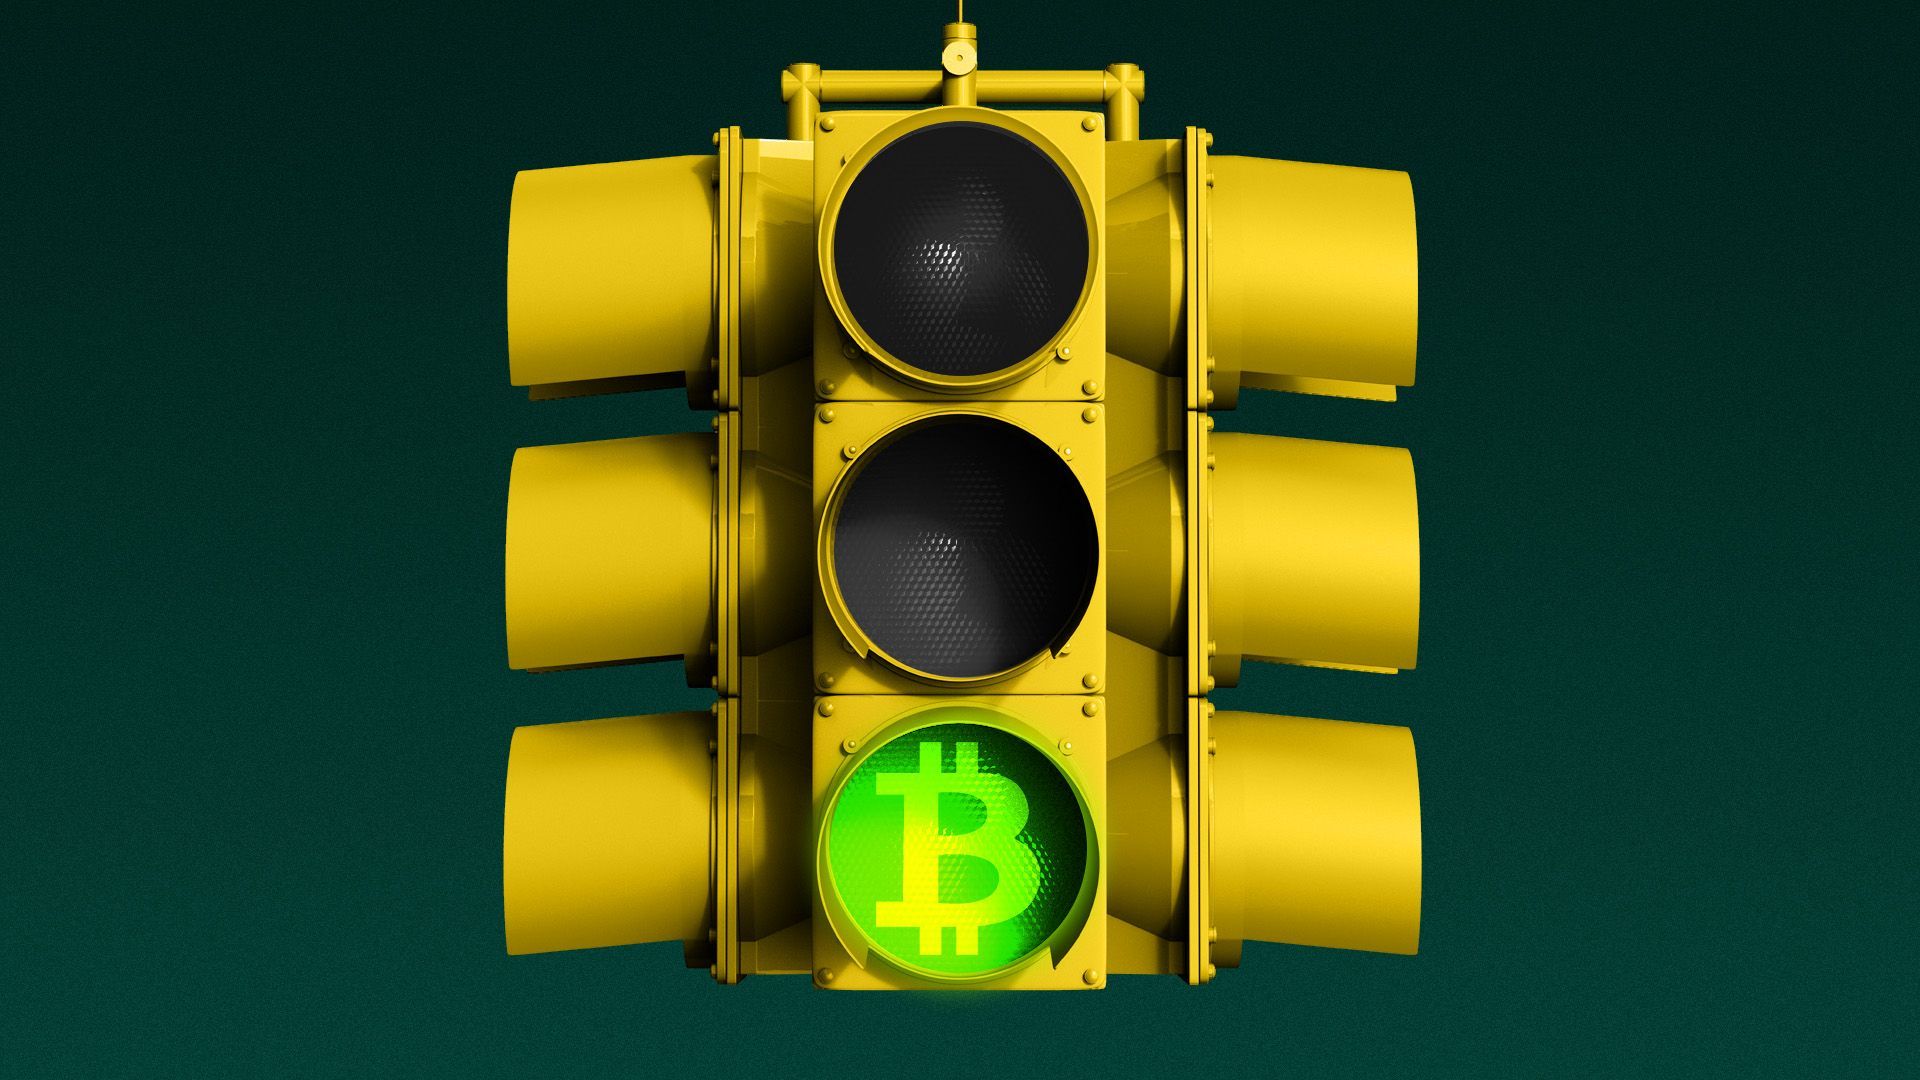 Illustration of a traffic light with the green light featuring a bitcoin symbol